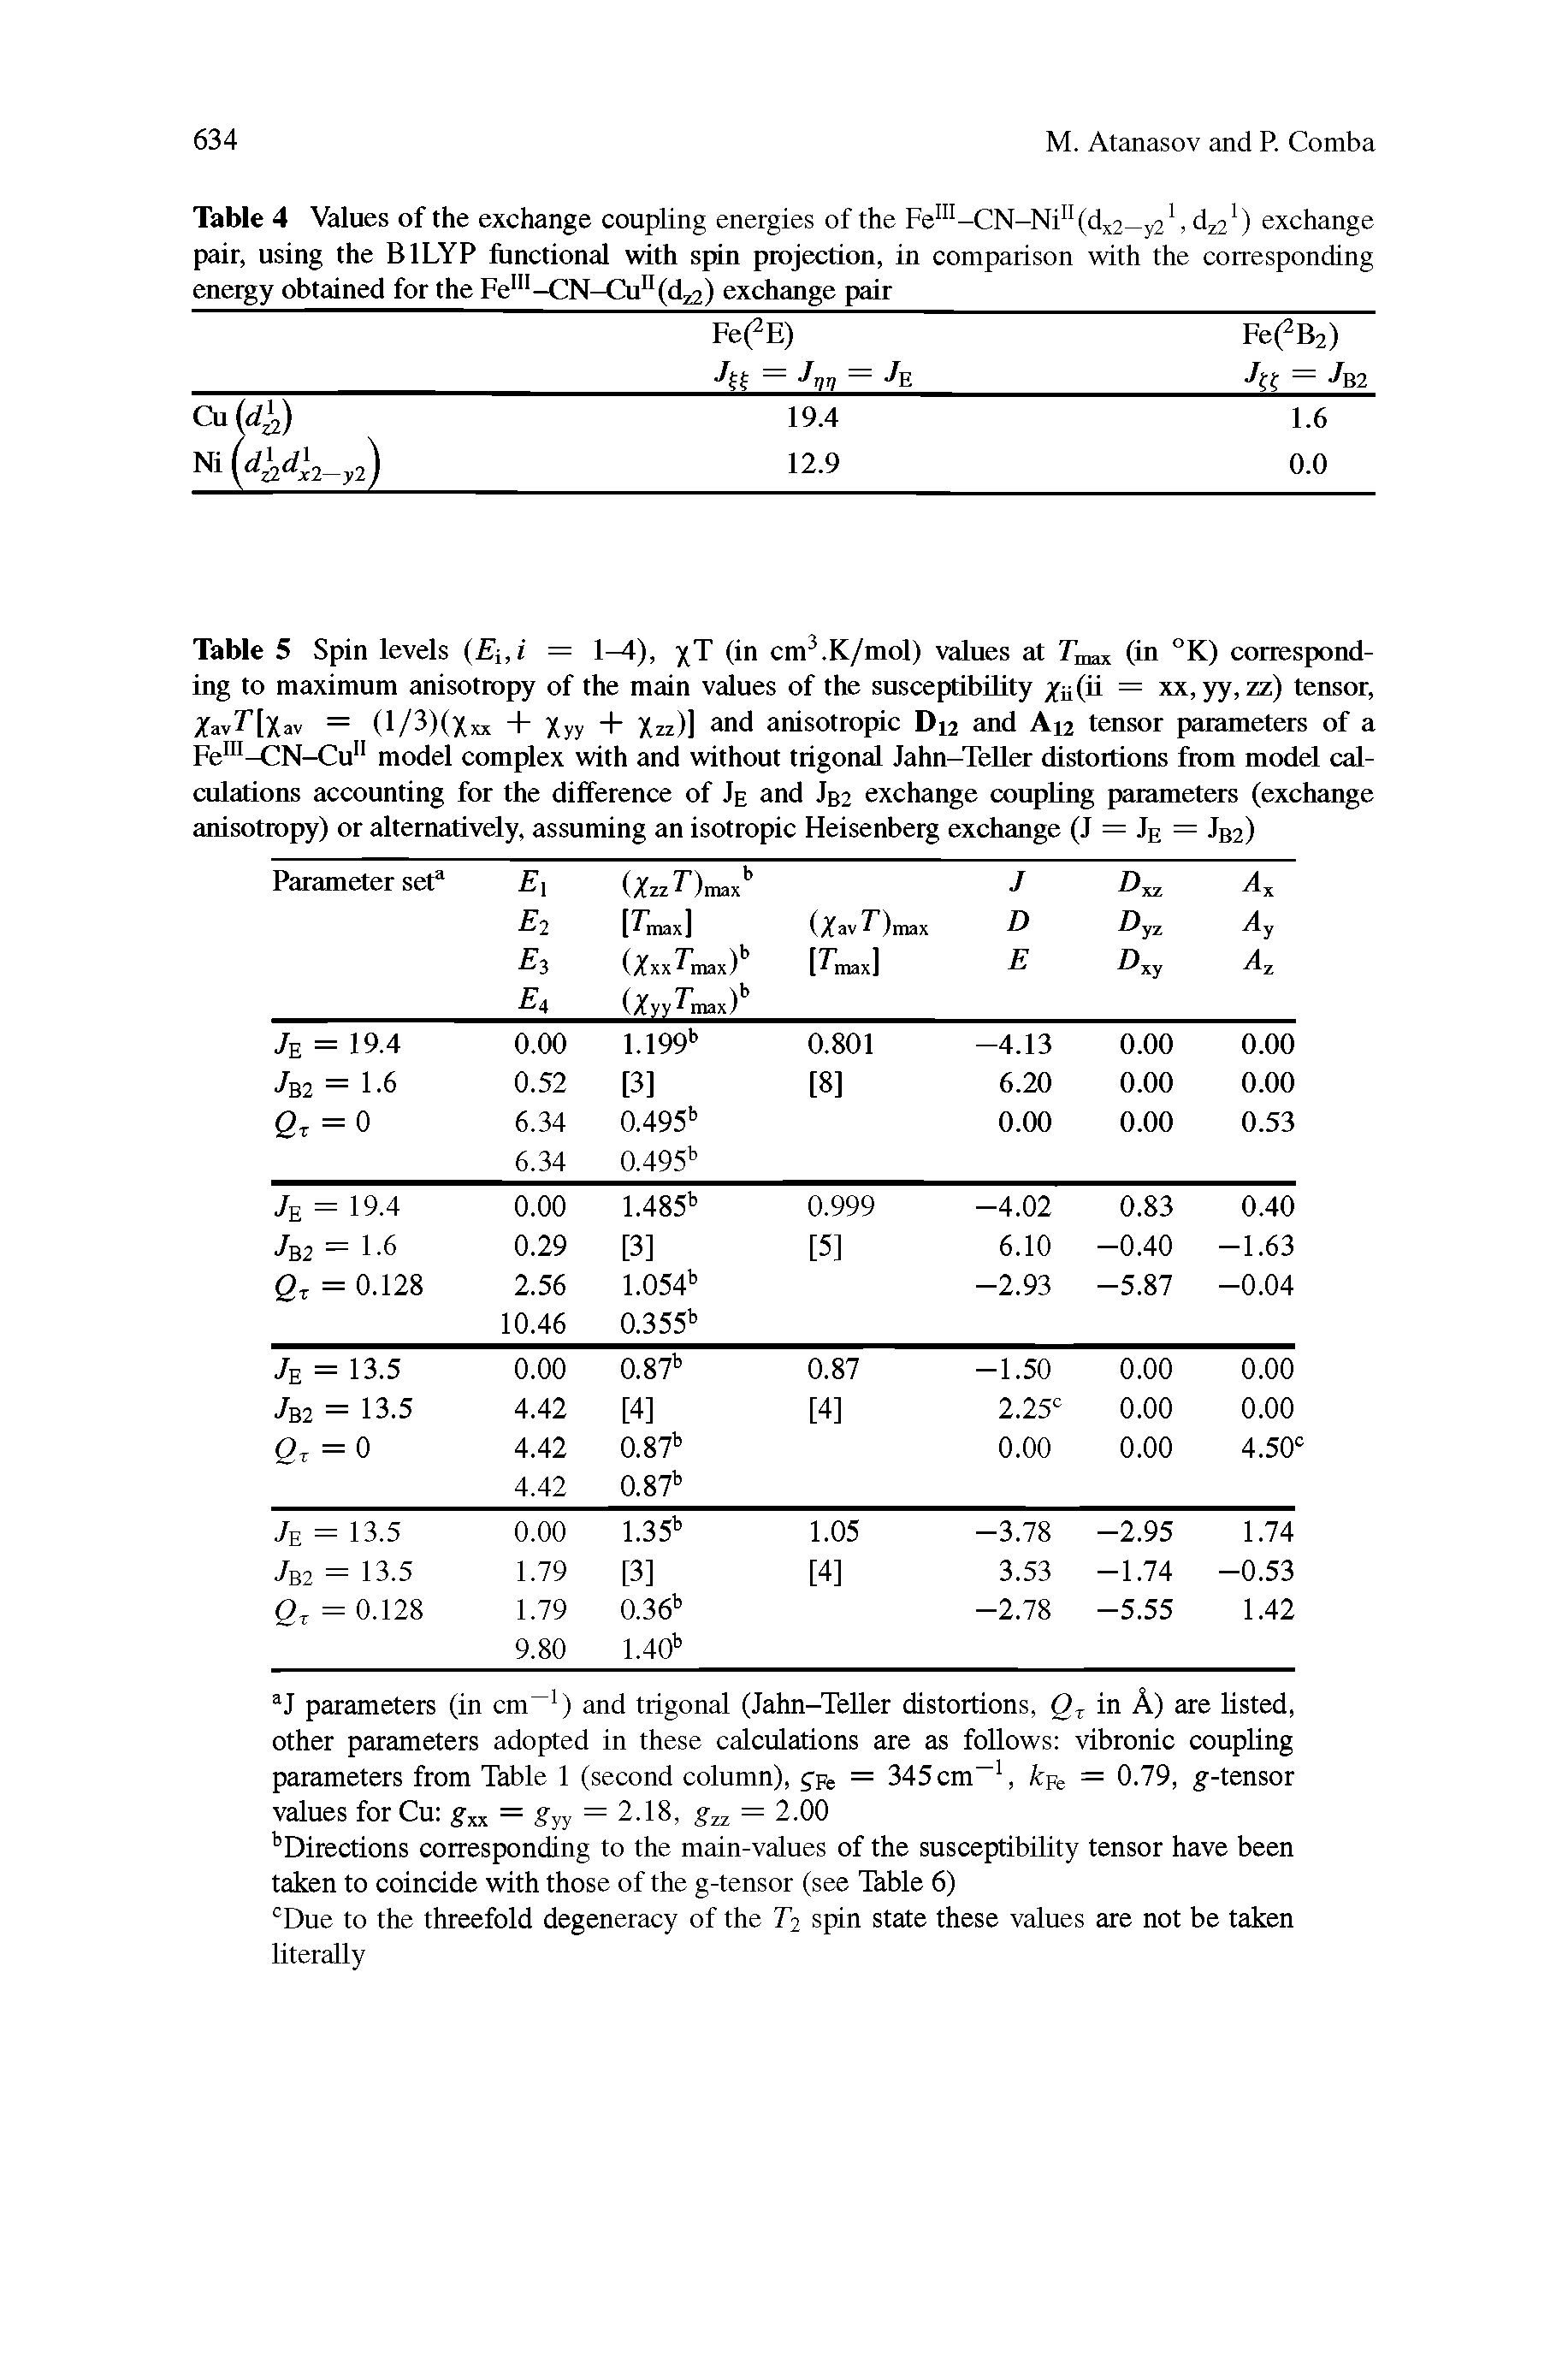 Table 5 Spin levels (Ei,i = 1 ), /T (in cm. K/mol) values at (in °K) corresponding to maximum anisotropy of the main values of the susceptibility /ii(ii = xx, yy, zz) tensor, /avr[Xav = (l/3)(Xxx + Xyy + Xzz)] and anisotropic D12 and A12 tensor parameters of a Fe -CN-Cu" model complex with and without trigonal Jahn-TeUer distortions from model calculations accounting for the difference of Je and Jb2 exchange coupling parameters (exchange anisotropy) or alternatively, assuming an isotropic Heisenberg exchange (1 = 1e = 1b2)...